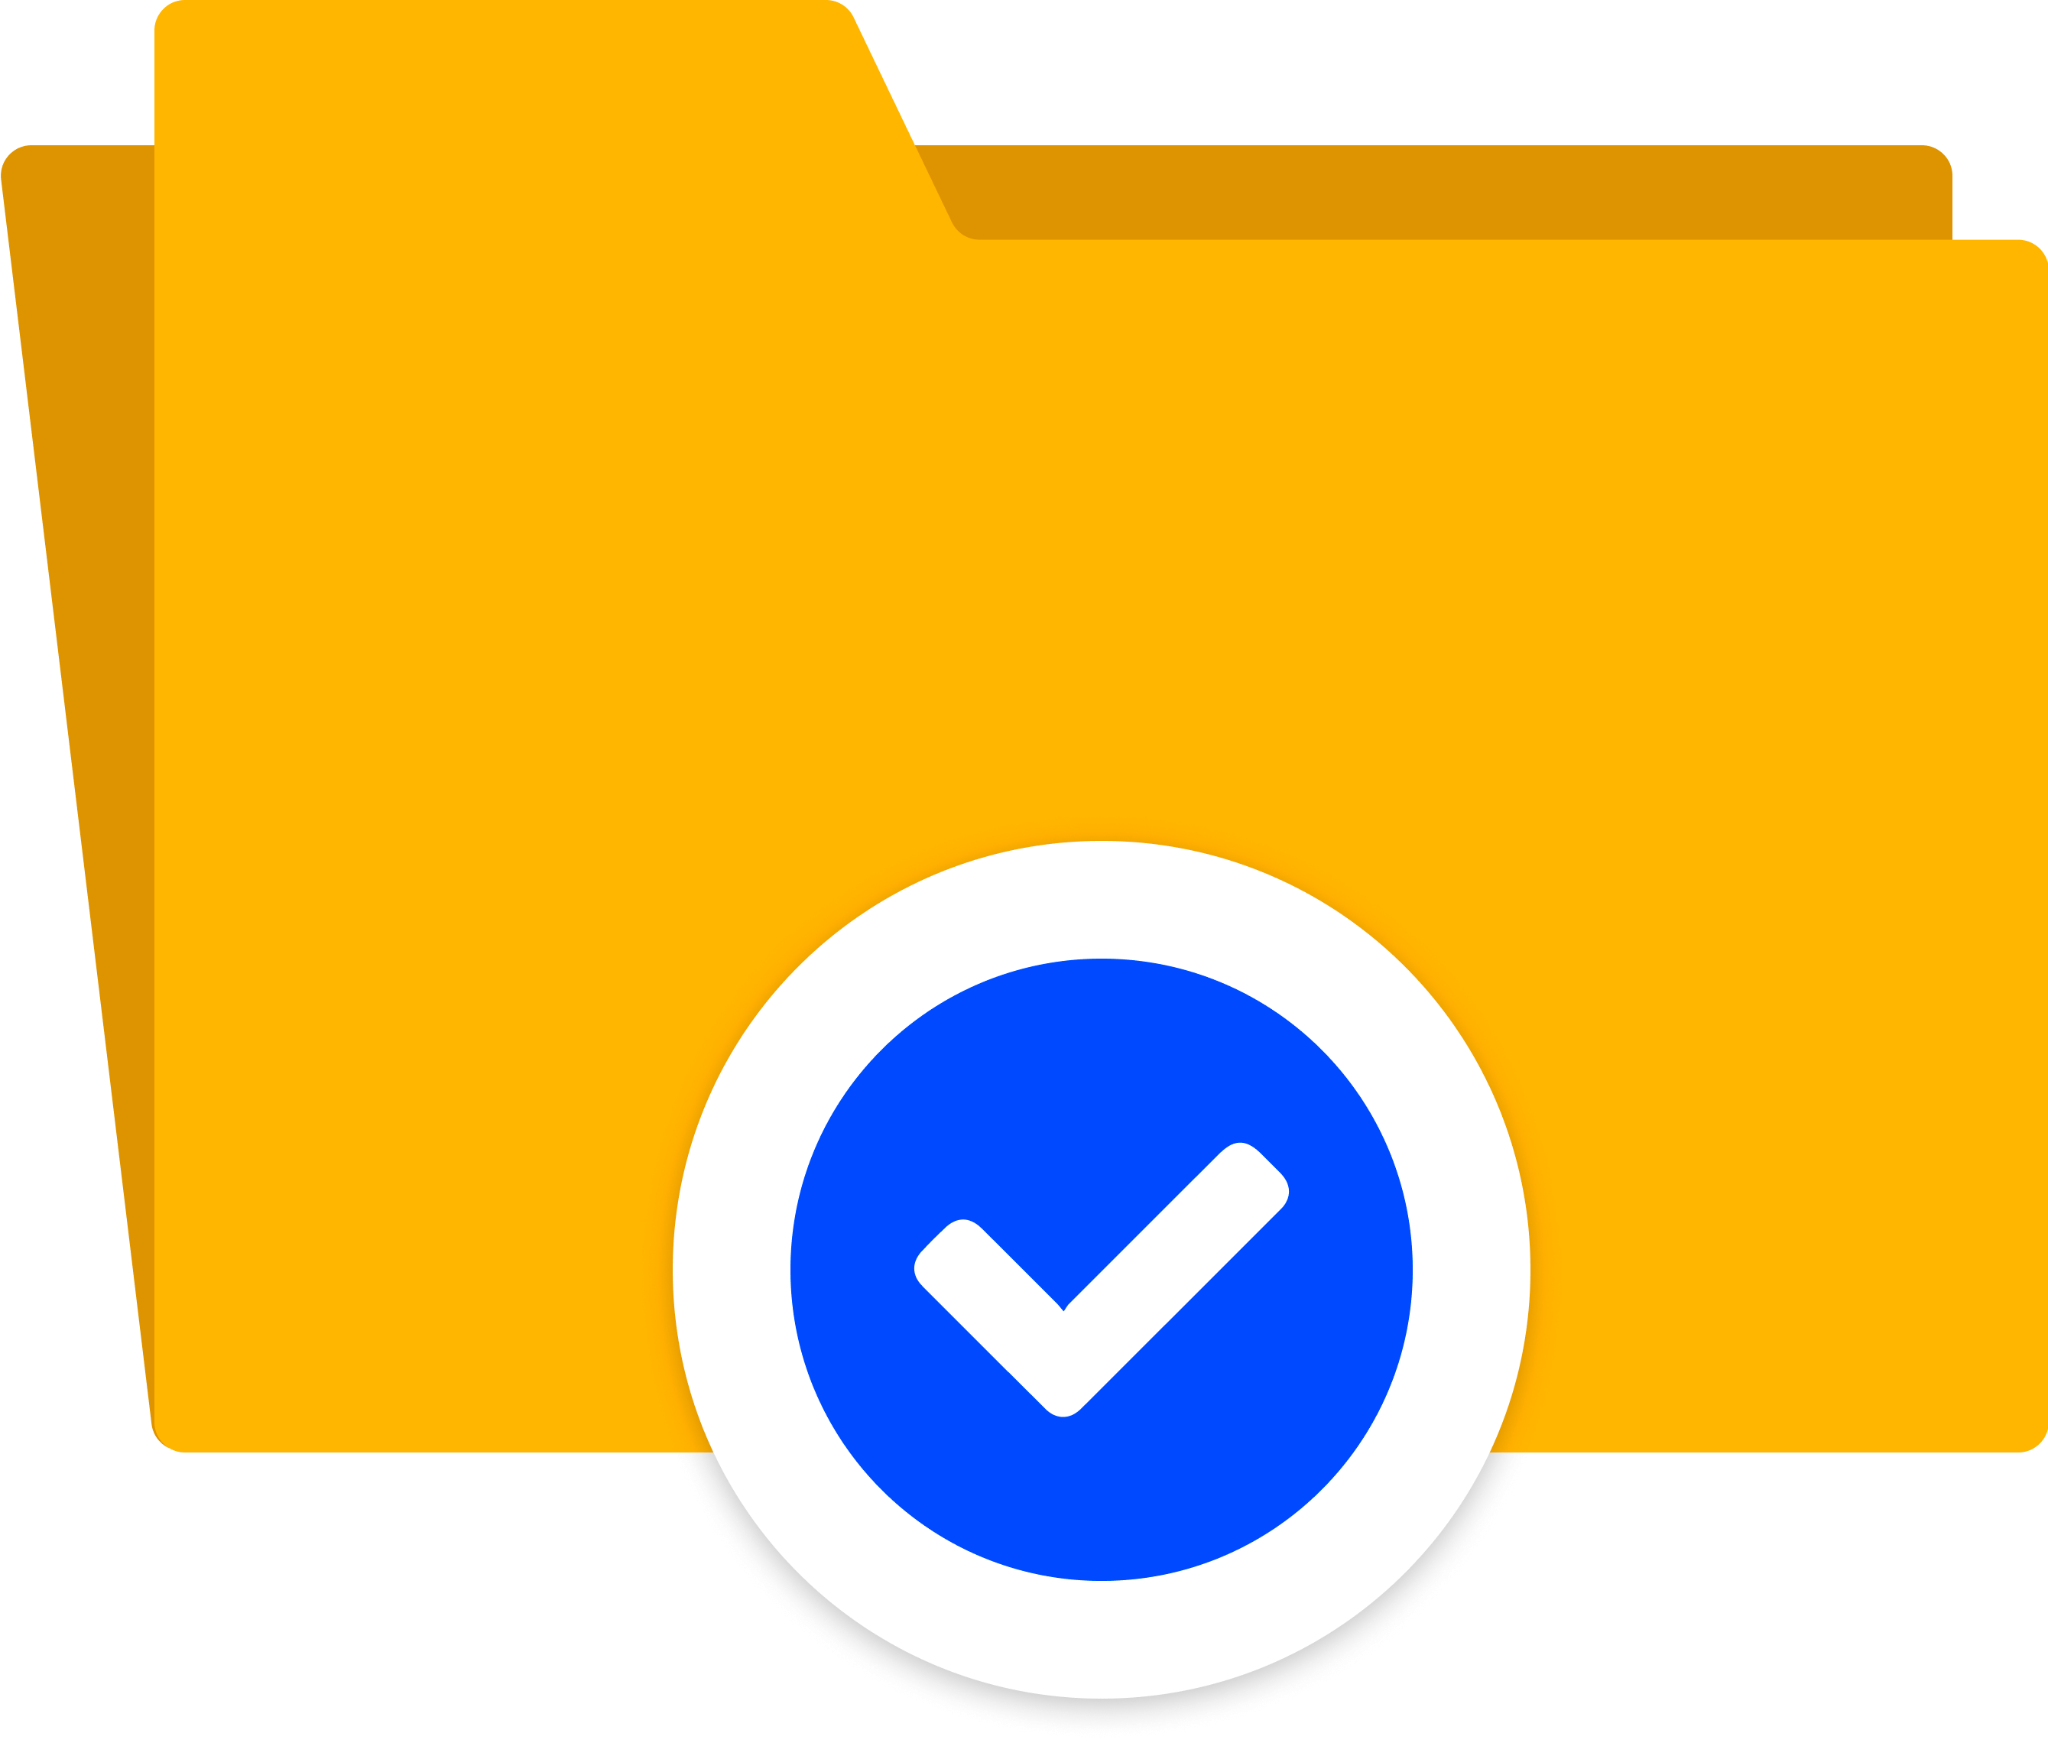 icon-folder-with-blue-check-mark